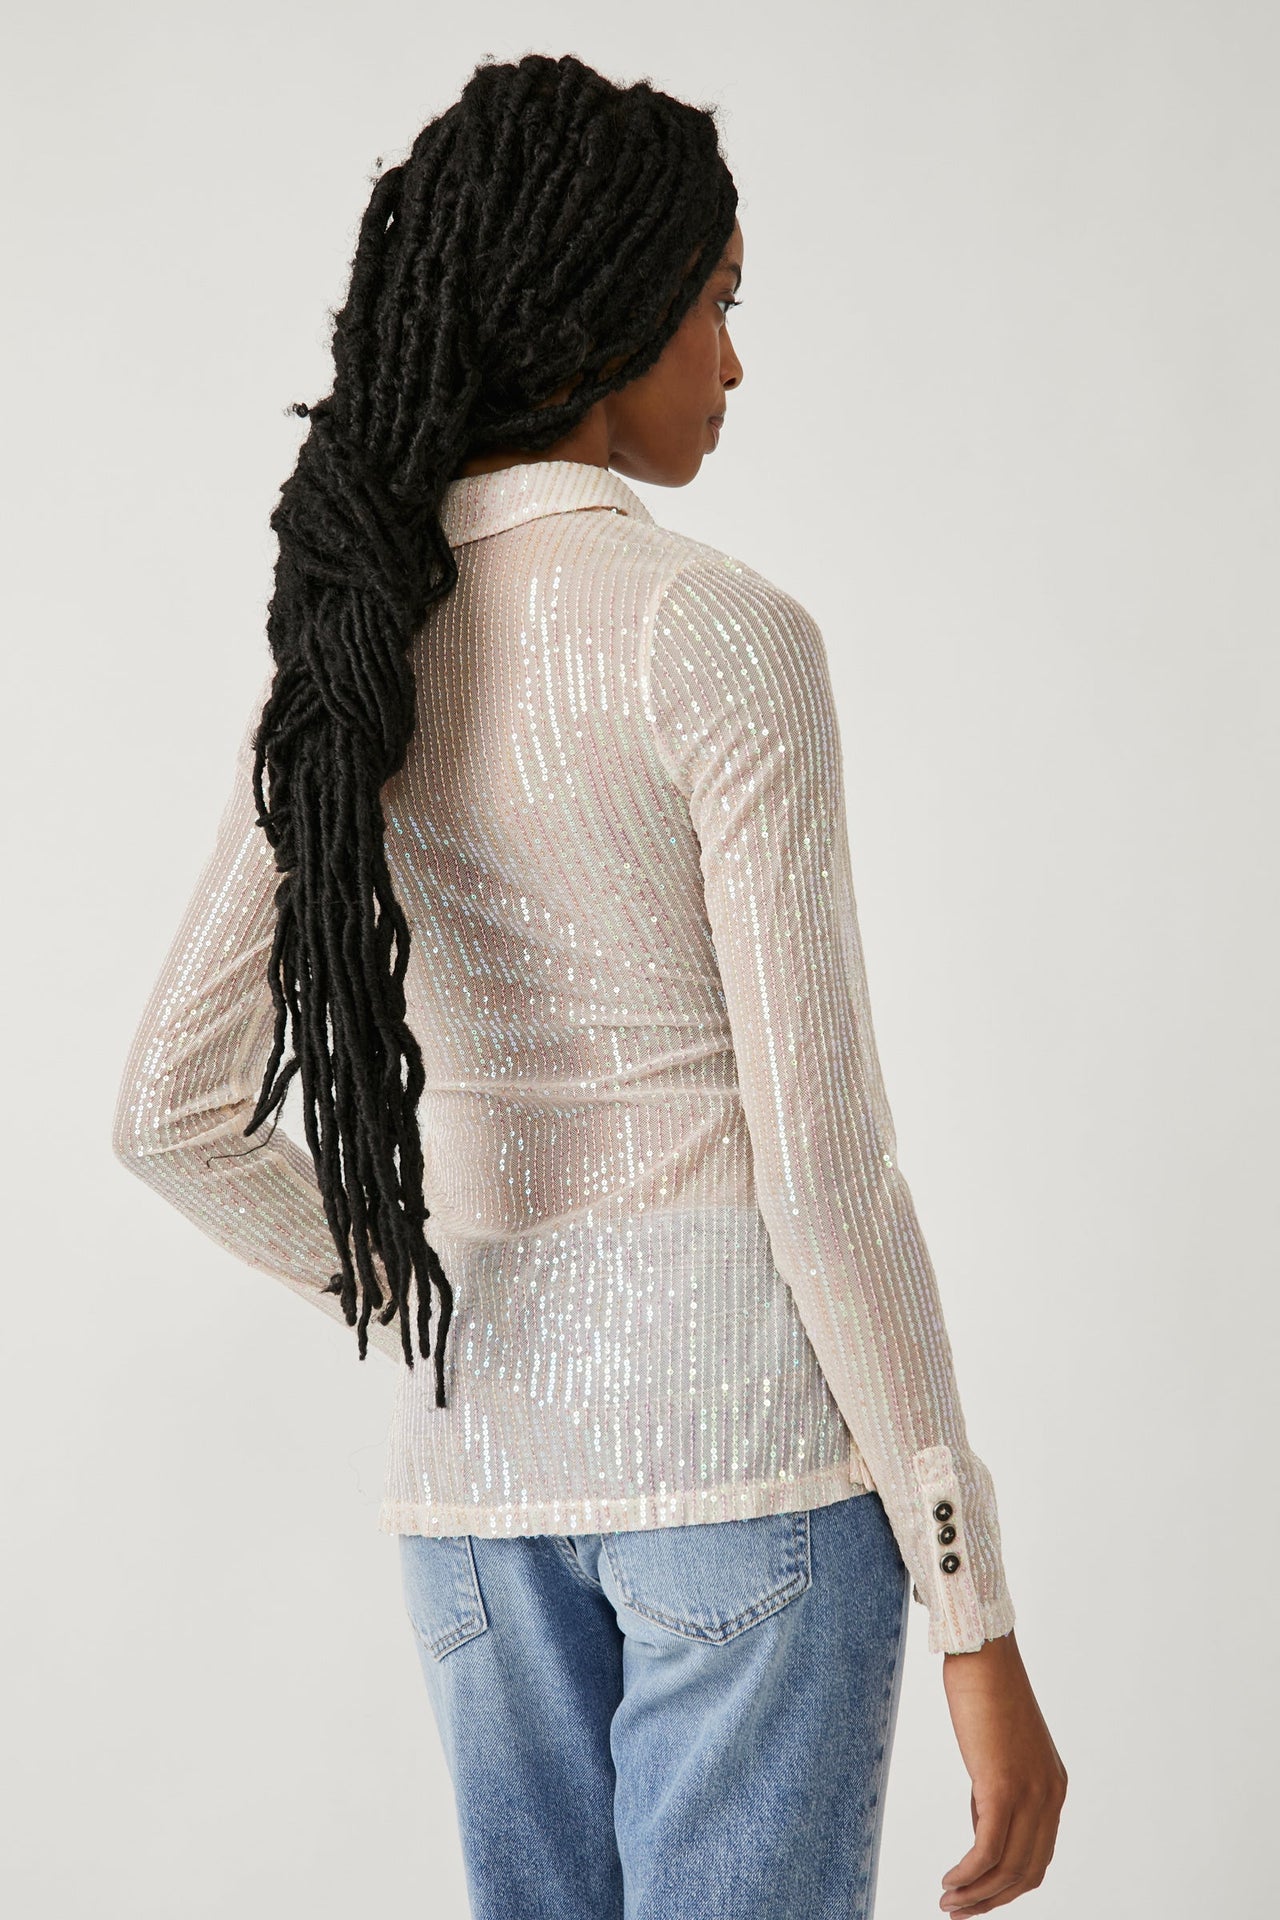 Free People Glitter Mesh Long Sleeve Layering Top in Gray